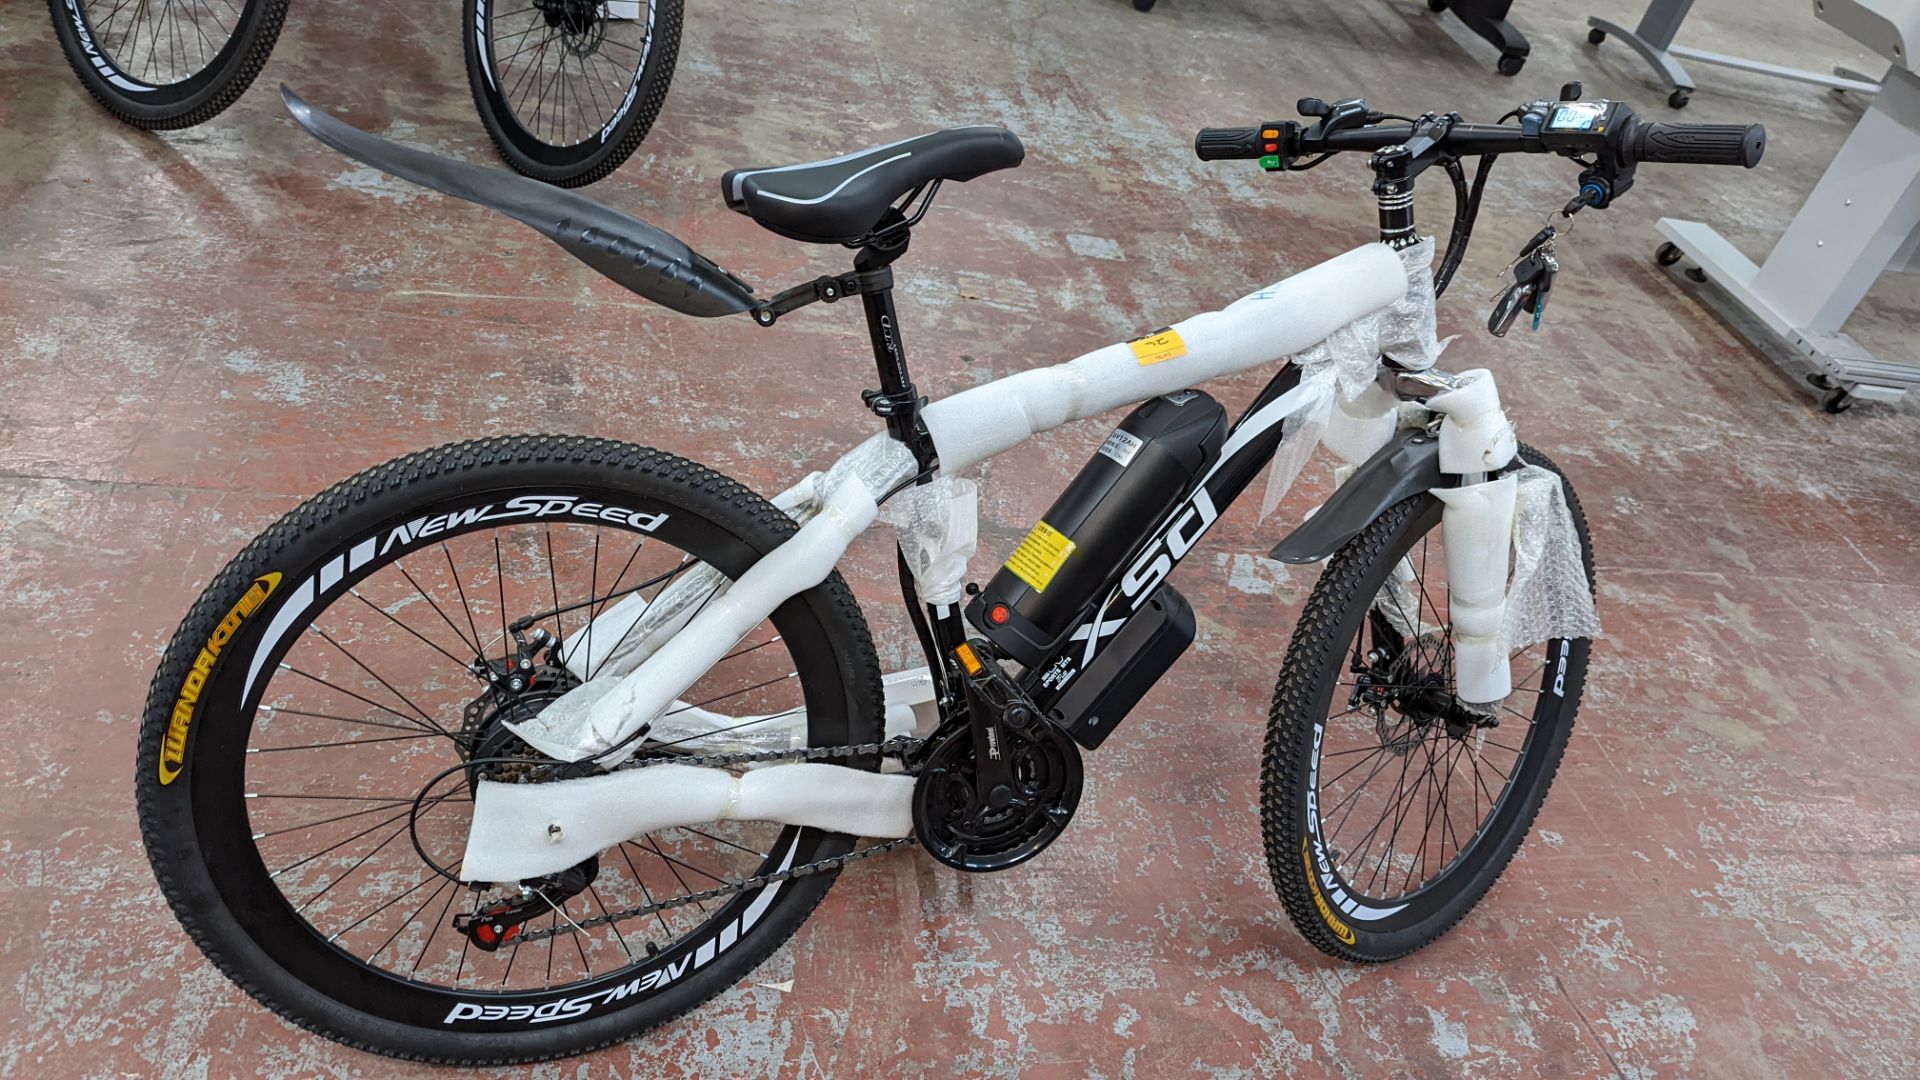 XSD FTX Sport MTB 7.5 Racing electric bike with Shimano Tourney TZ gears. Includes 36v 12AH battery, - Image 8 of 24